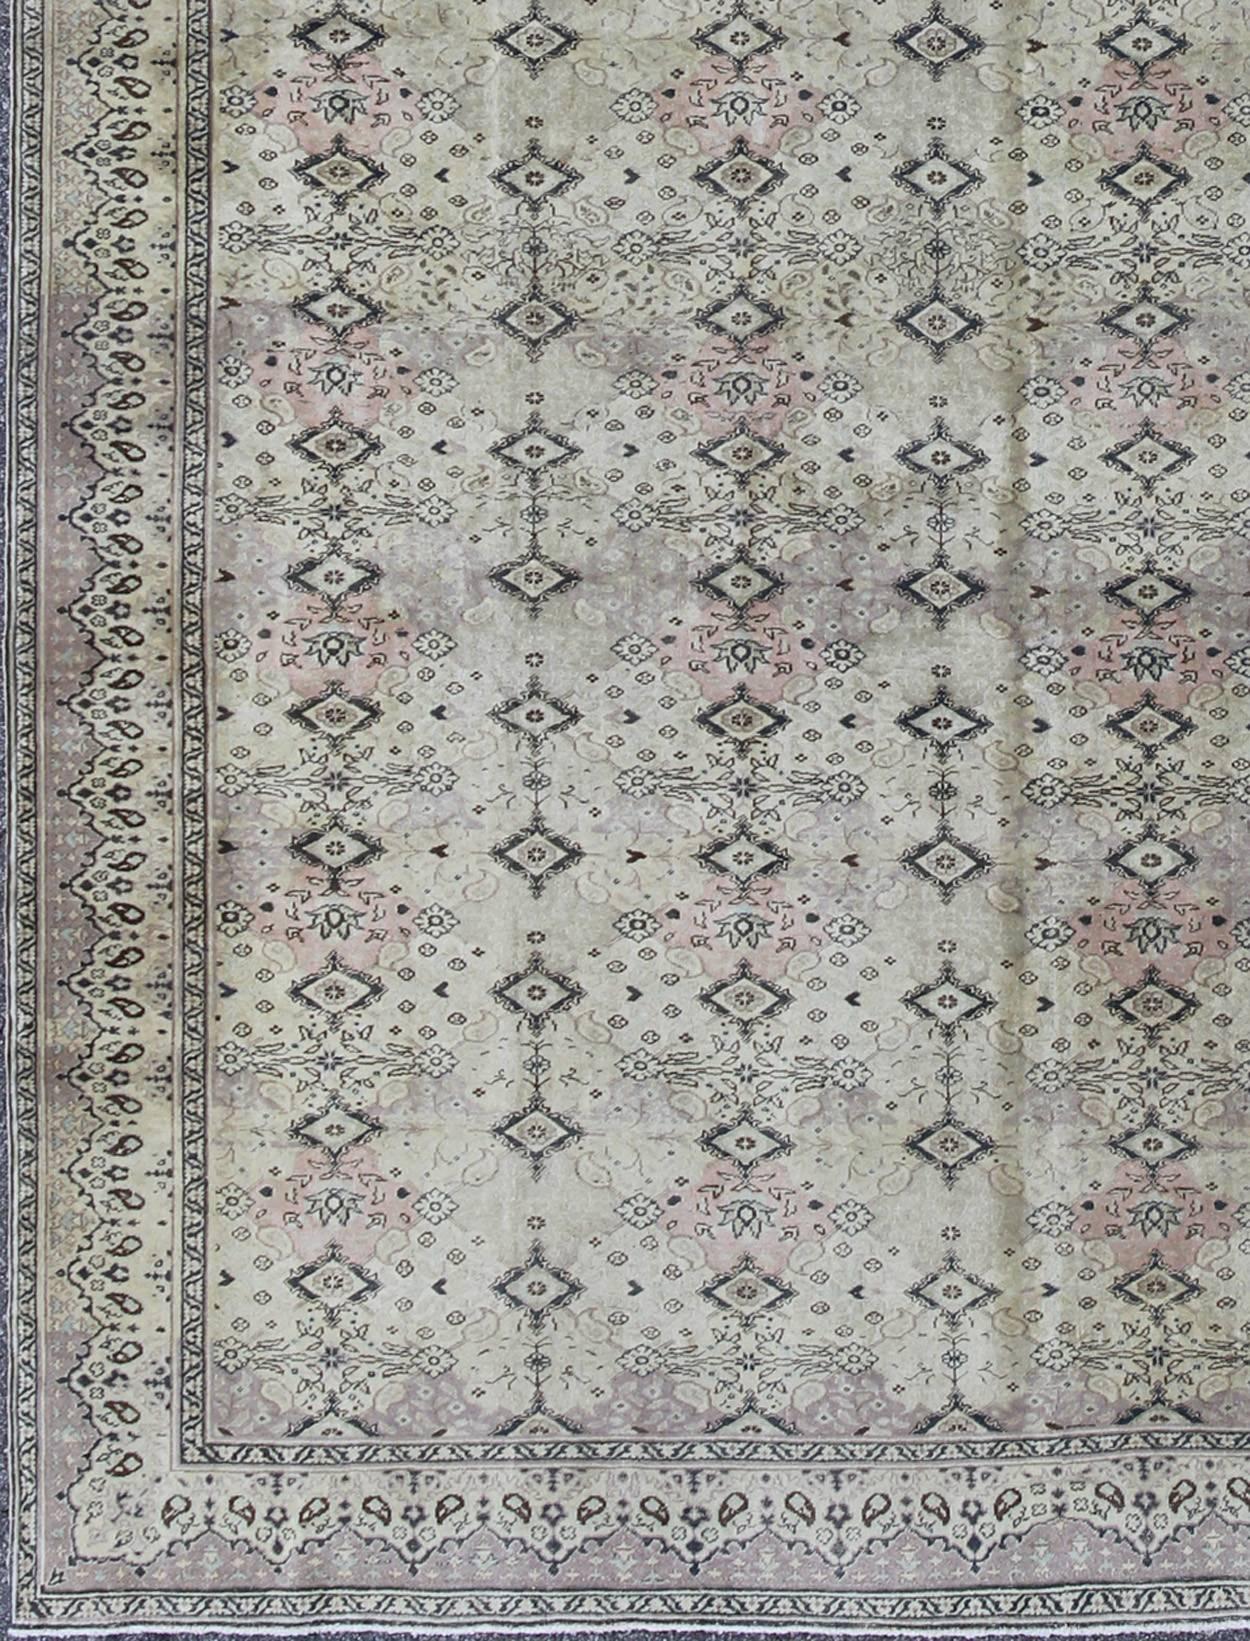 Stylized diamond motifs are featured in a repeating pattern on this vintage Sivas wool rug. A blend of Persian inspiration and Turkish design creates a unique, dynamic aesthetic in this one-of-a-kind piece, while its soft, ivory ground plays host to